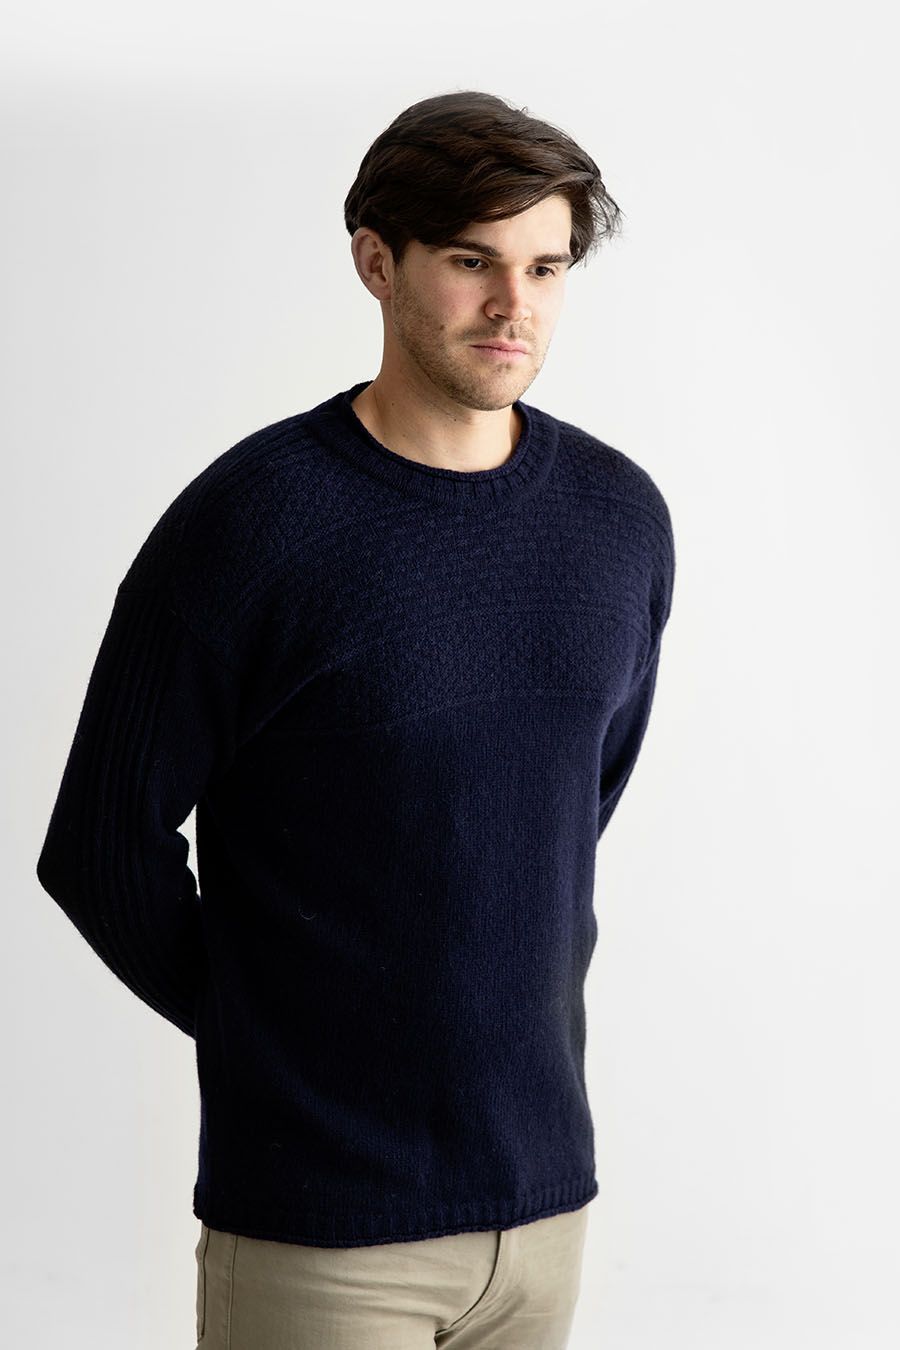 Mens Gansey jumper sweater pullover shetland character wool gray 3 colours Clothing Mens Clothing Jumpers Guernsey jumper blue grey Putty Navy 